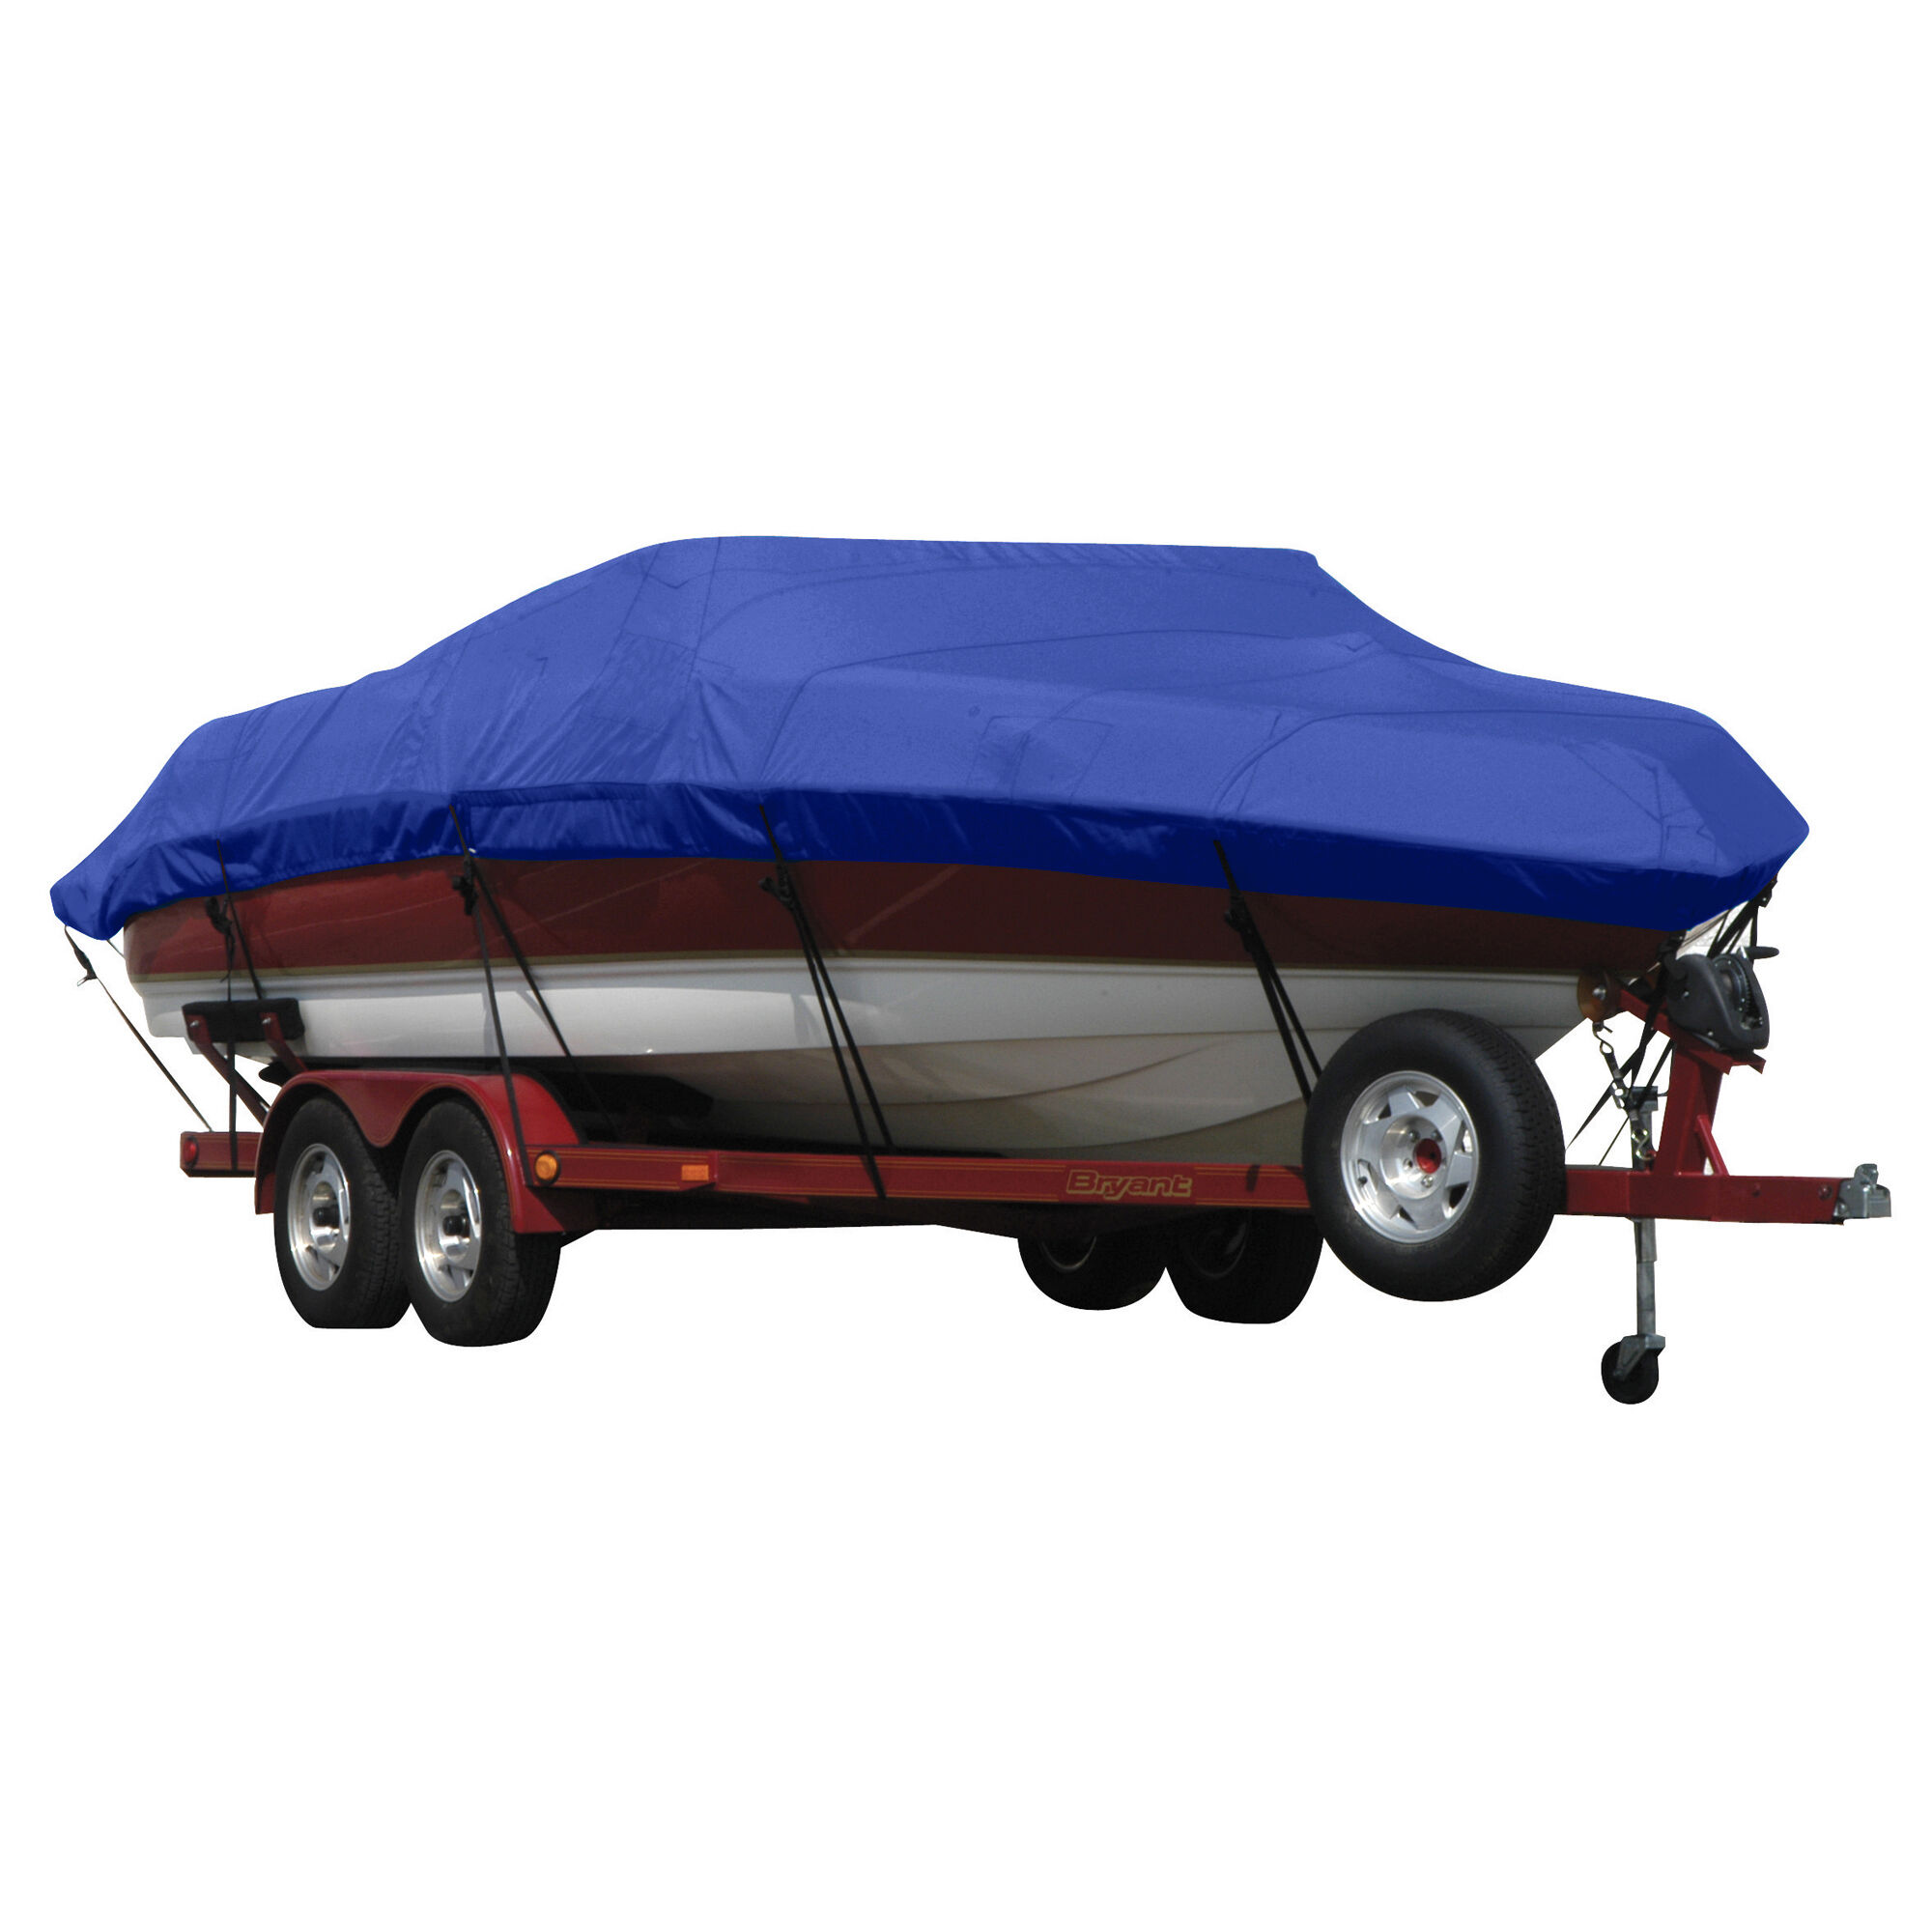 Covermate MARIAH SHABAH 200 BOW RIDER I/O Boat Cover in Ocean Blue